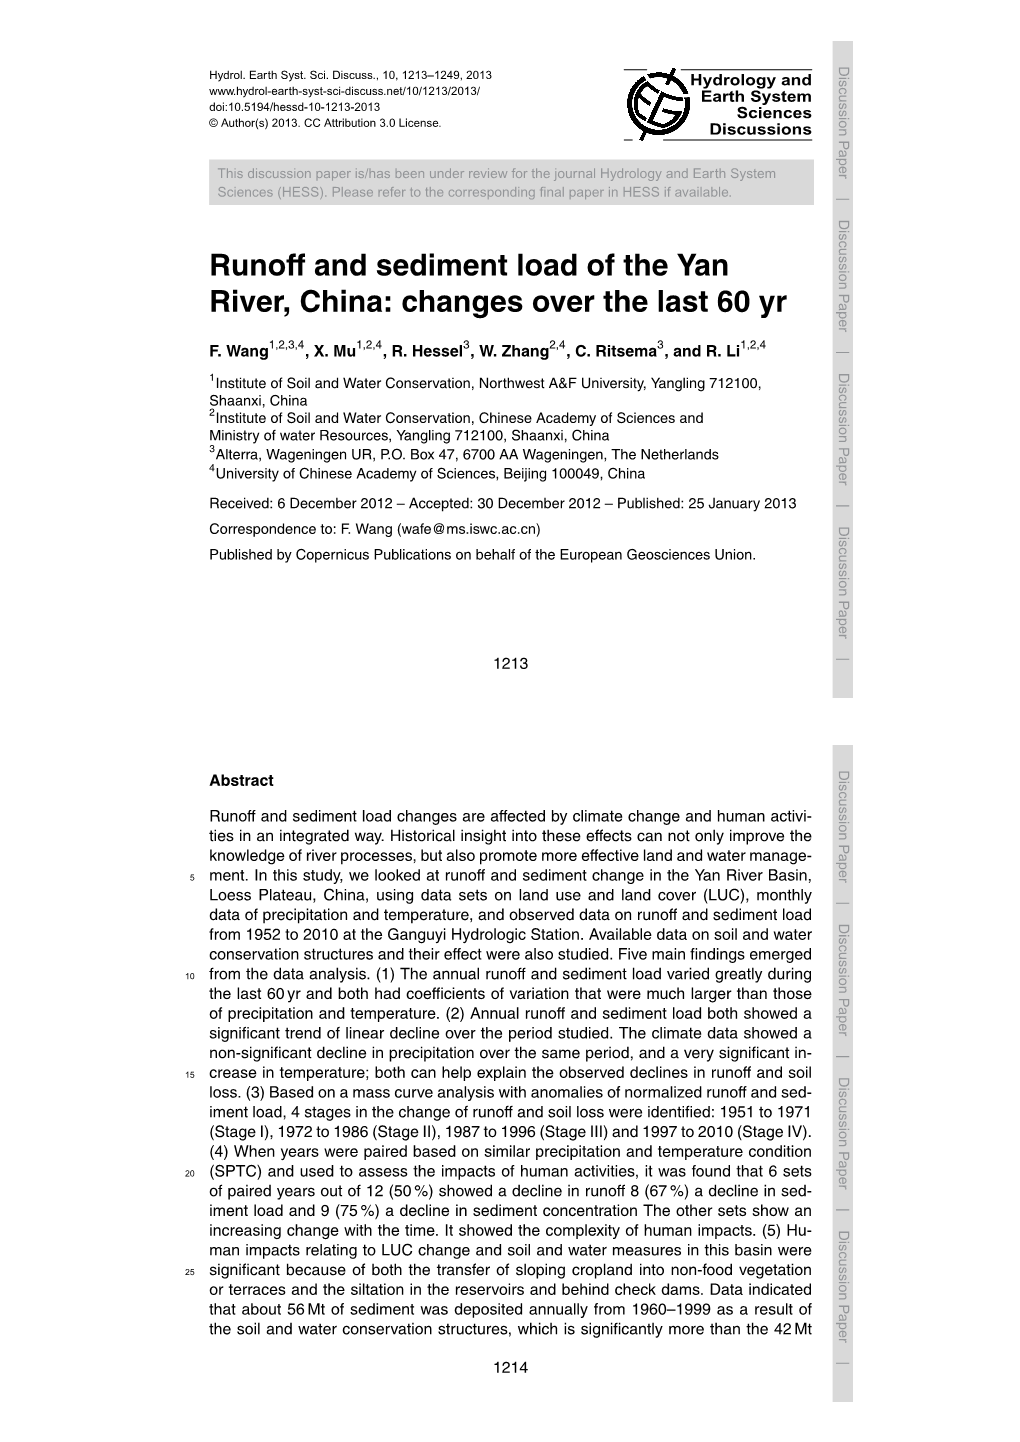 Runoff and Sediment Load of the Yan River, China: Changes Over the Last